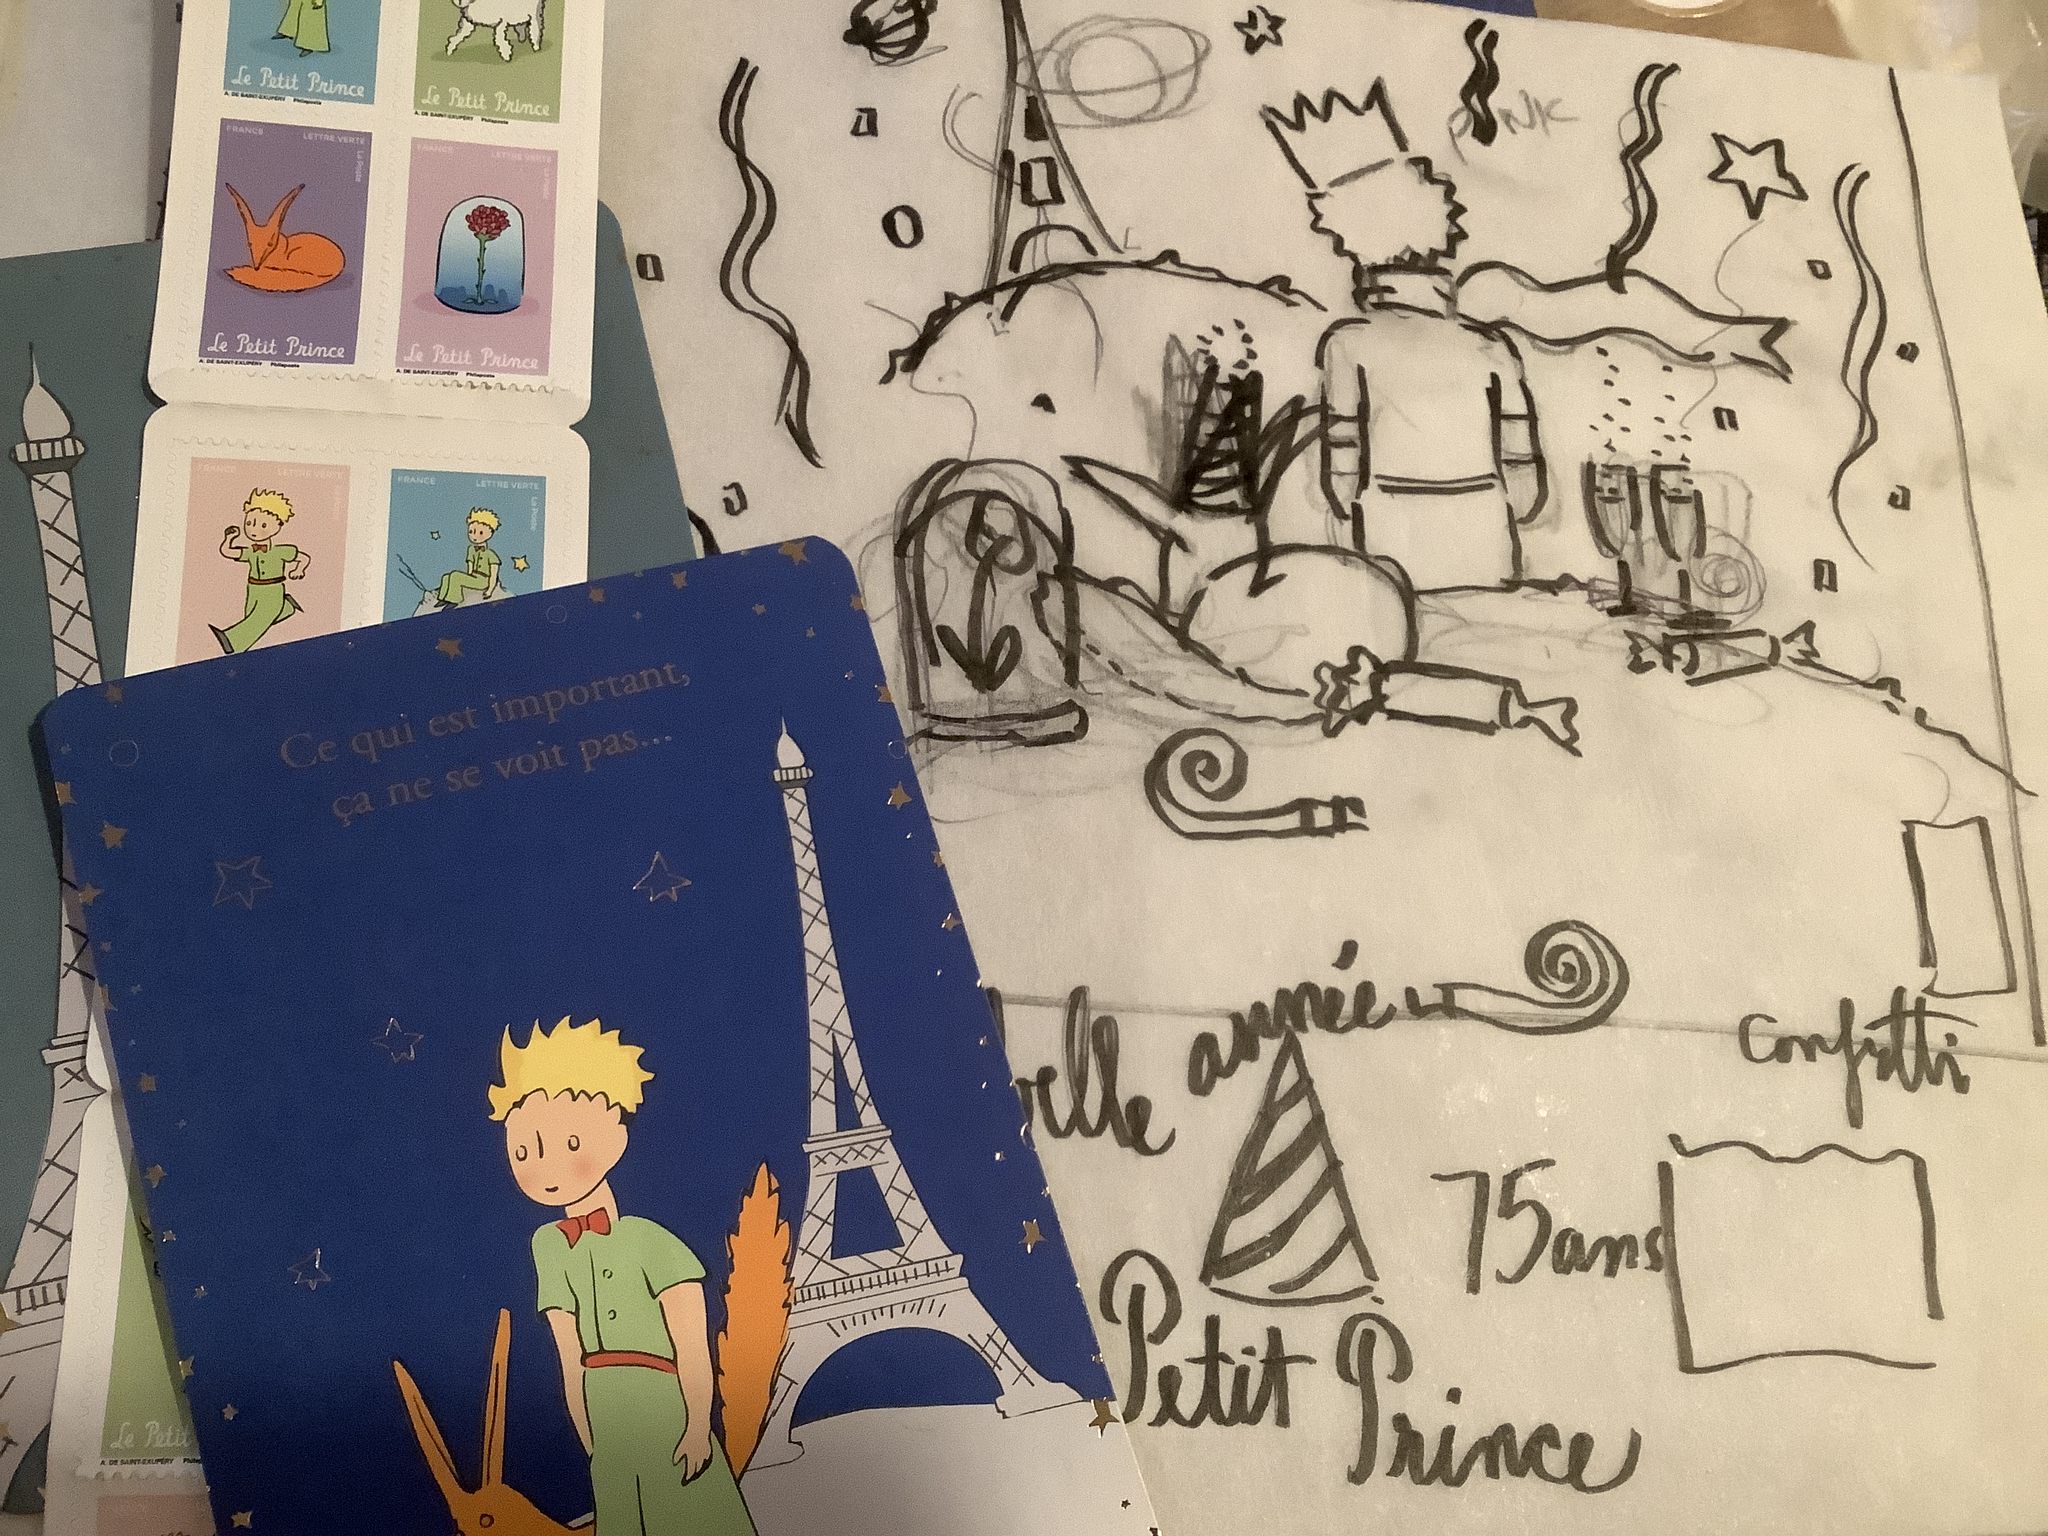 My little prince drawing - The Little Prince - Posters and Art Prints